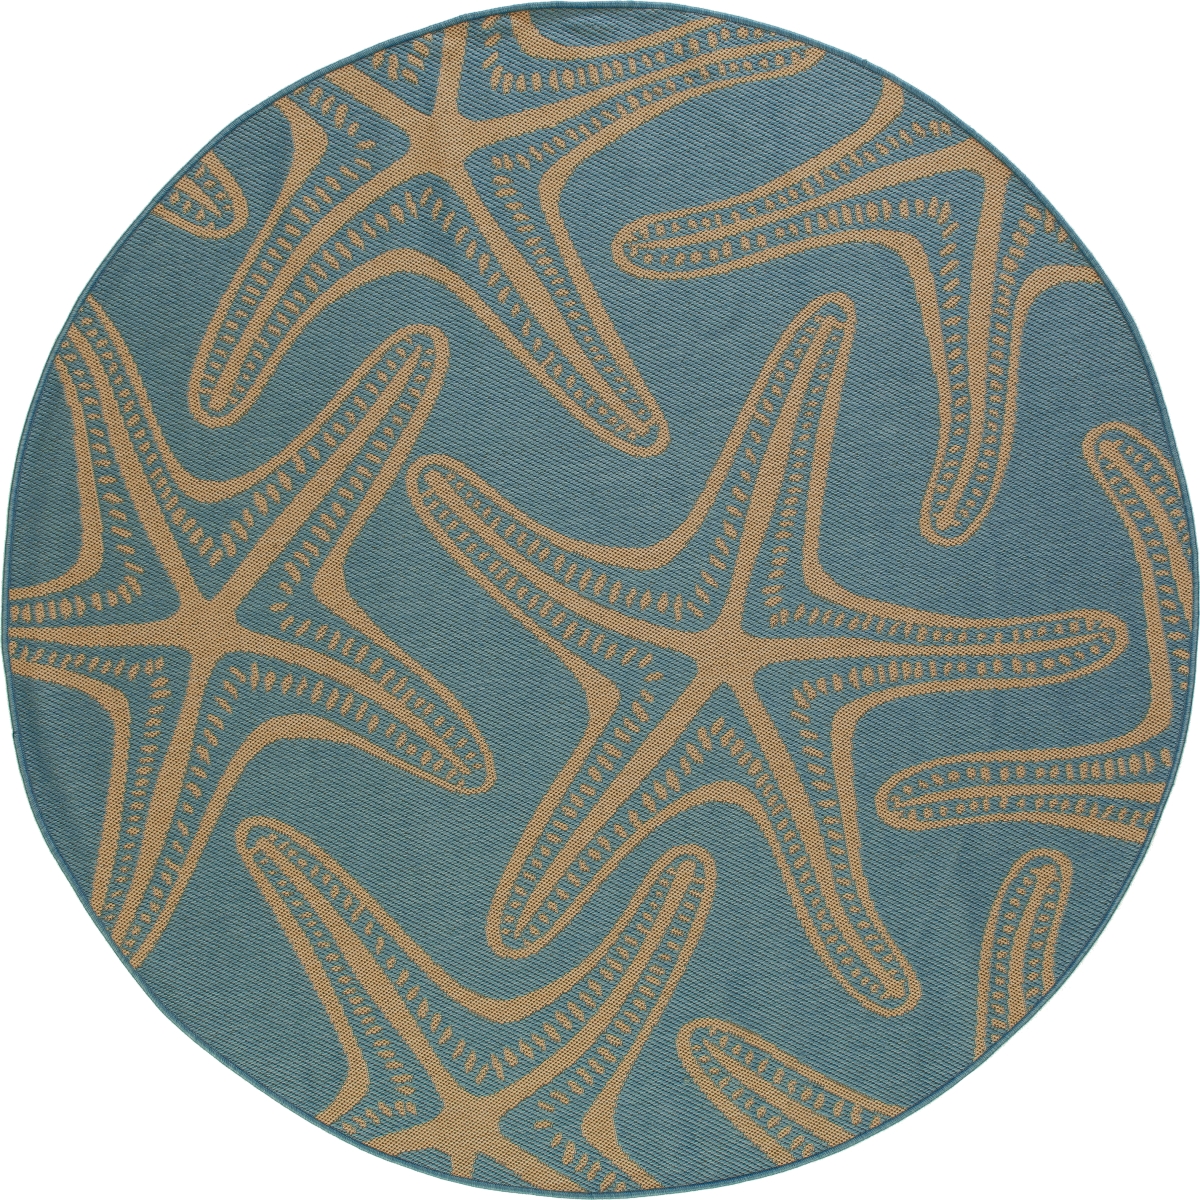 29489 7 Ft. Plymouth Collection Starfish Flat Woven Indoor & Outdoor Round Area Rug, Blue